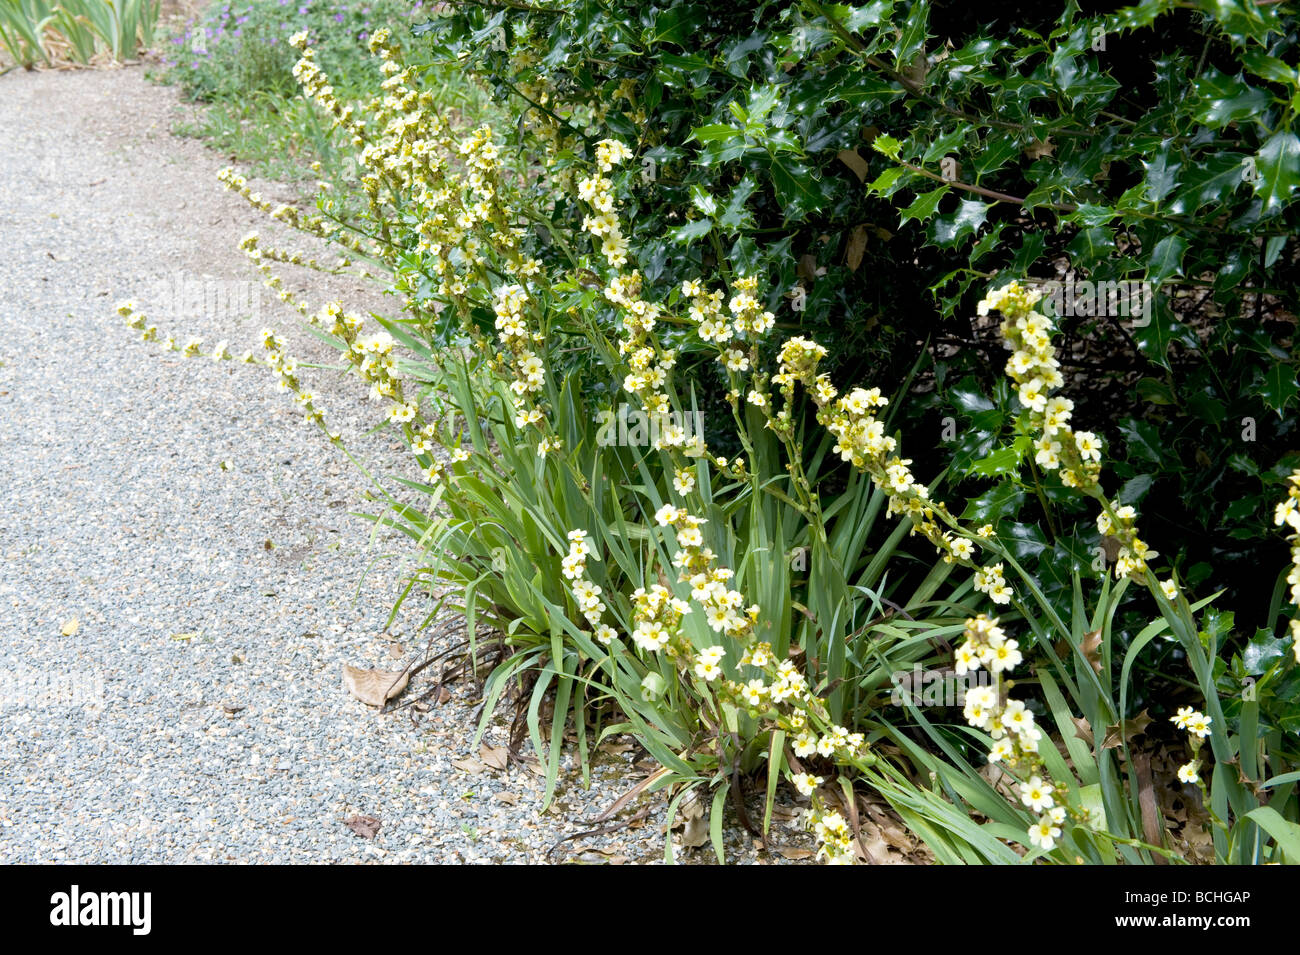 Sisyrinchium striatum phaiophleps nigricans clump forming perennial with pale yellow flowers Stock Photo